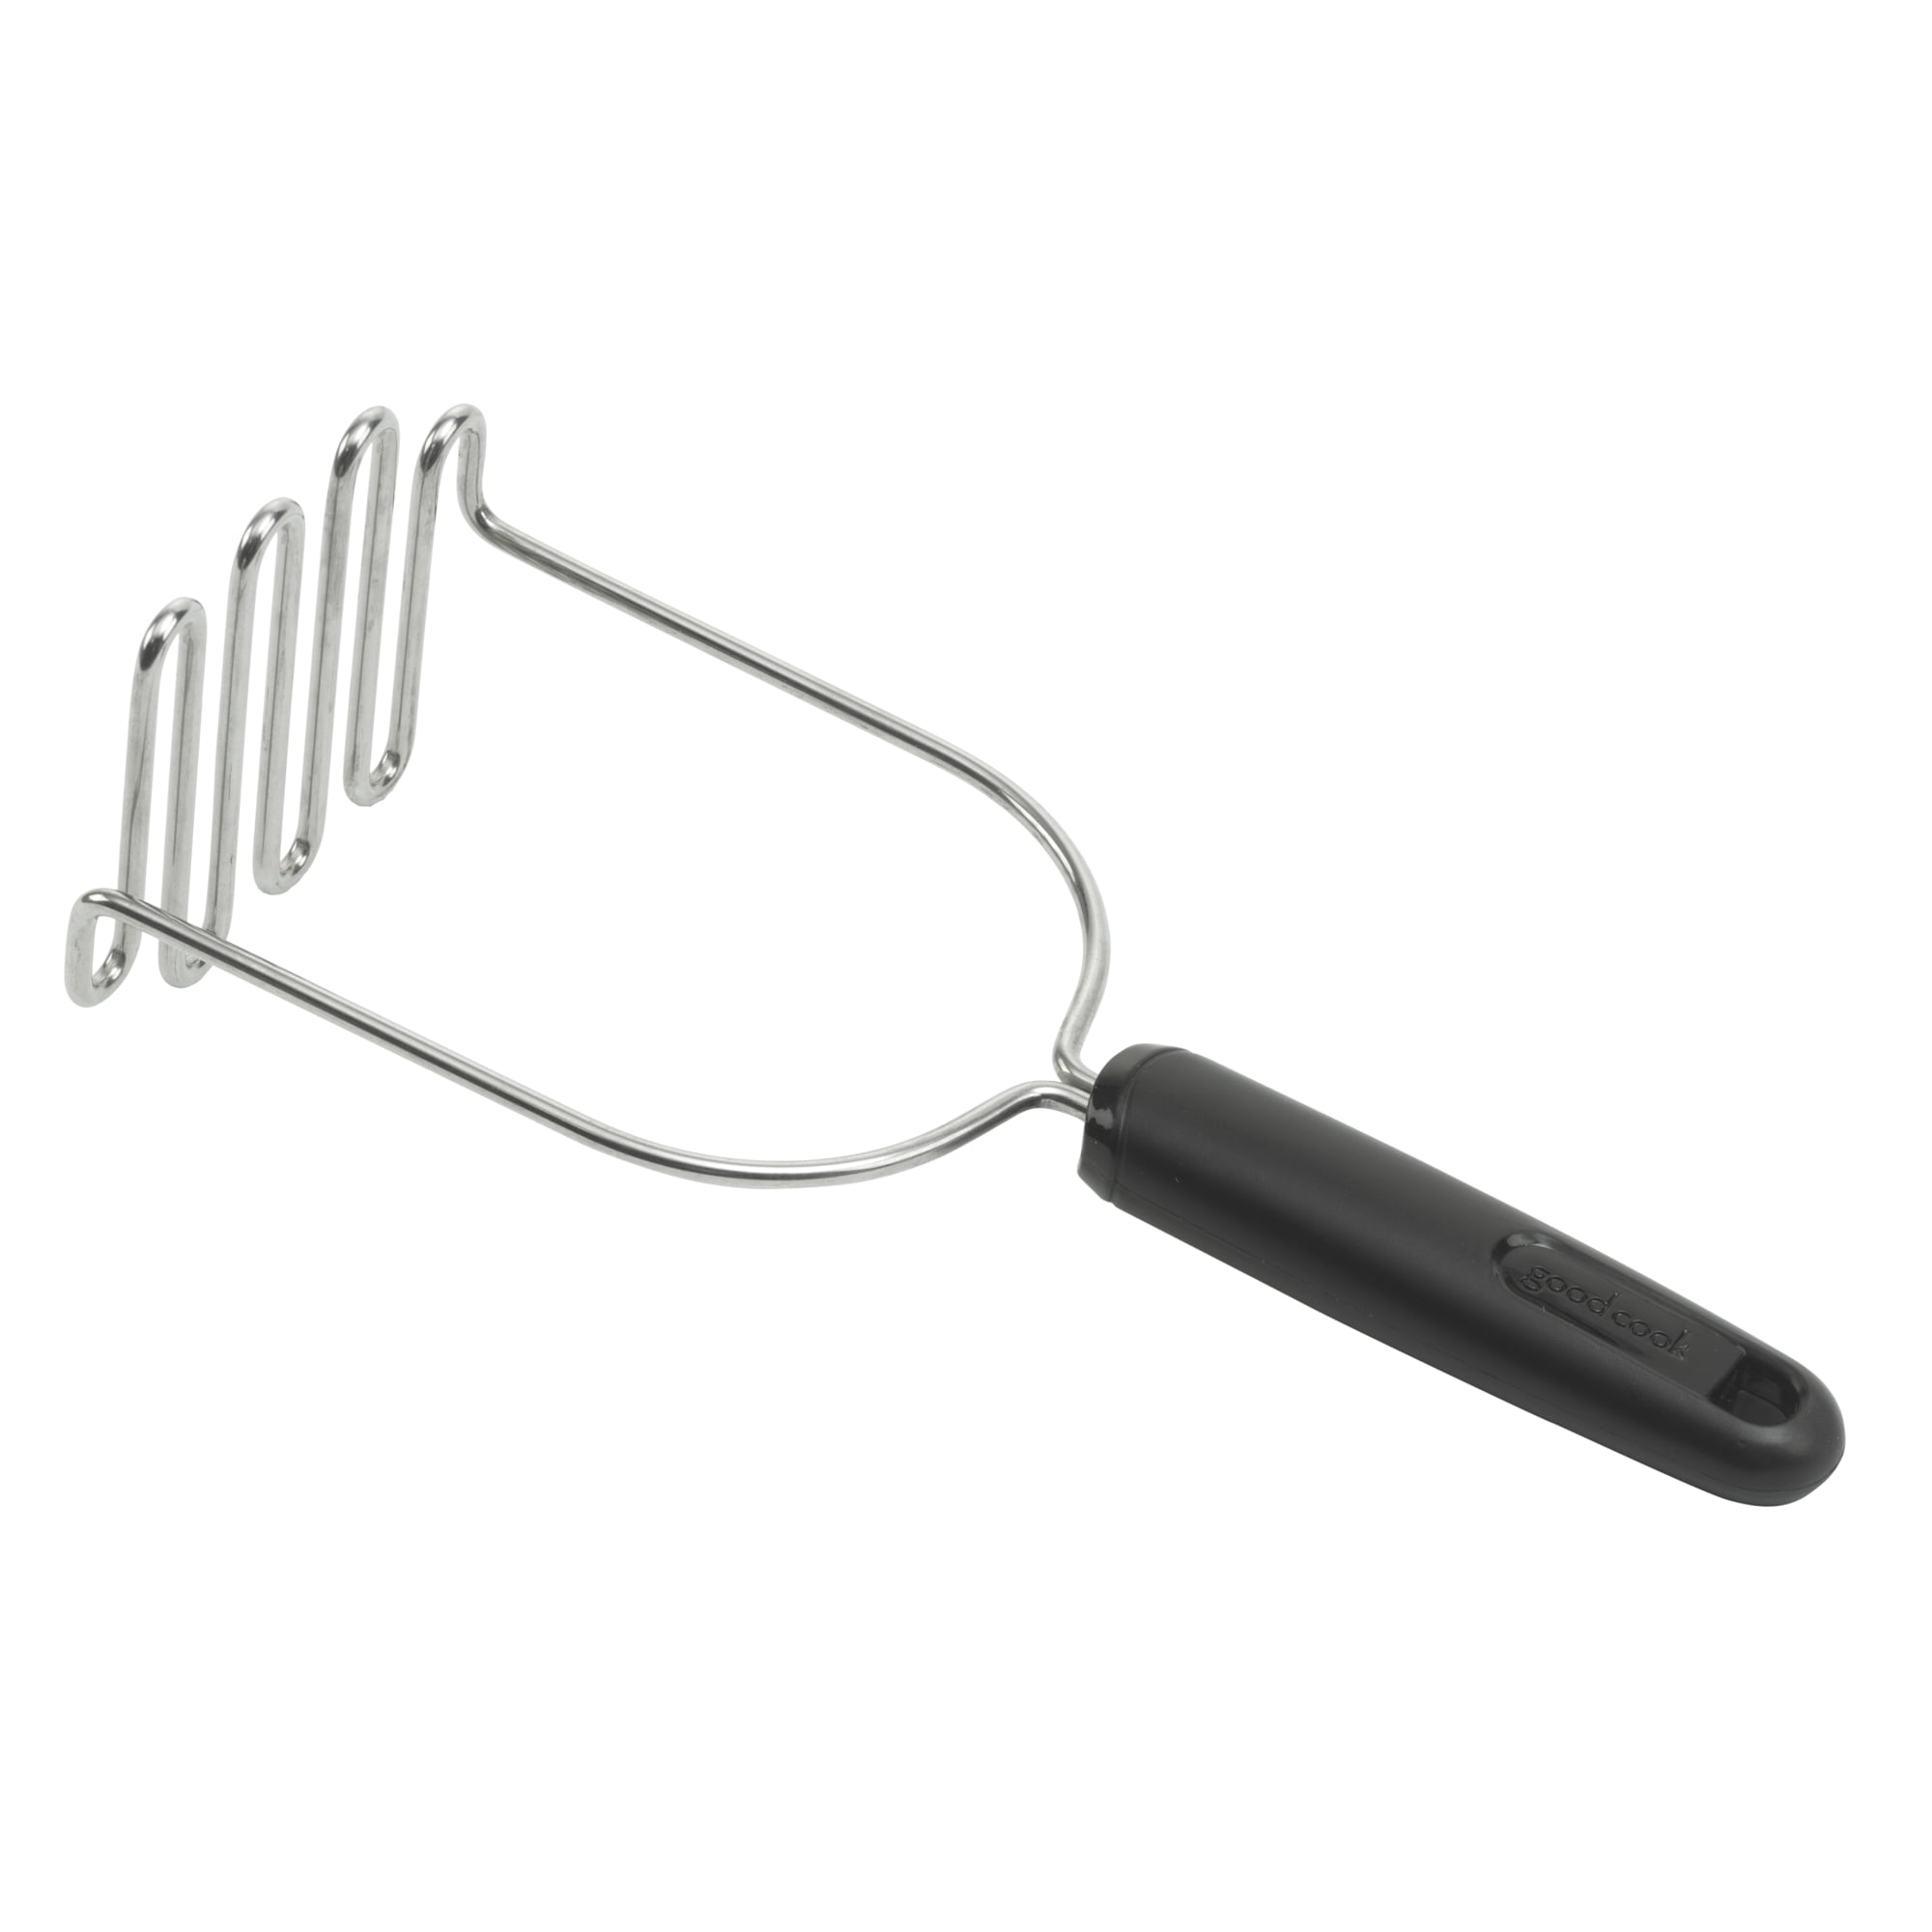 Dropship I Kito Ground Meat Chopper Utensil; Plastic Beef Hamburger Tool;  Potato Masher Black to Sell Online at a Lower Price